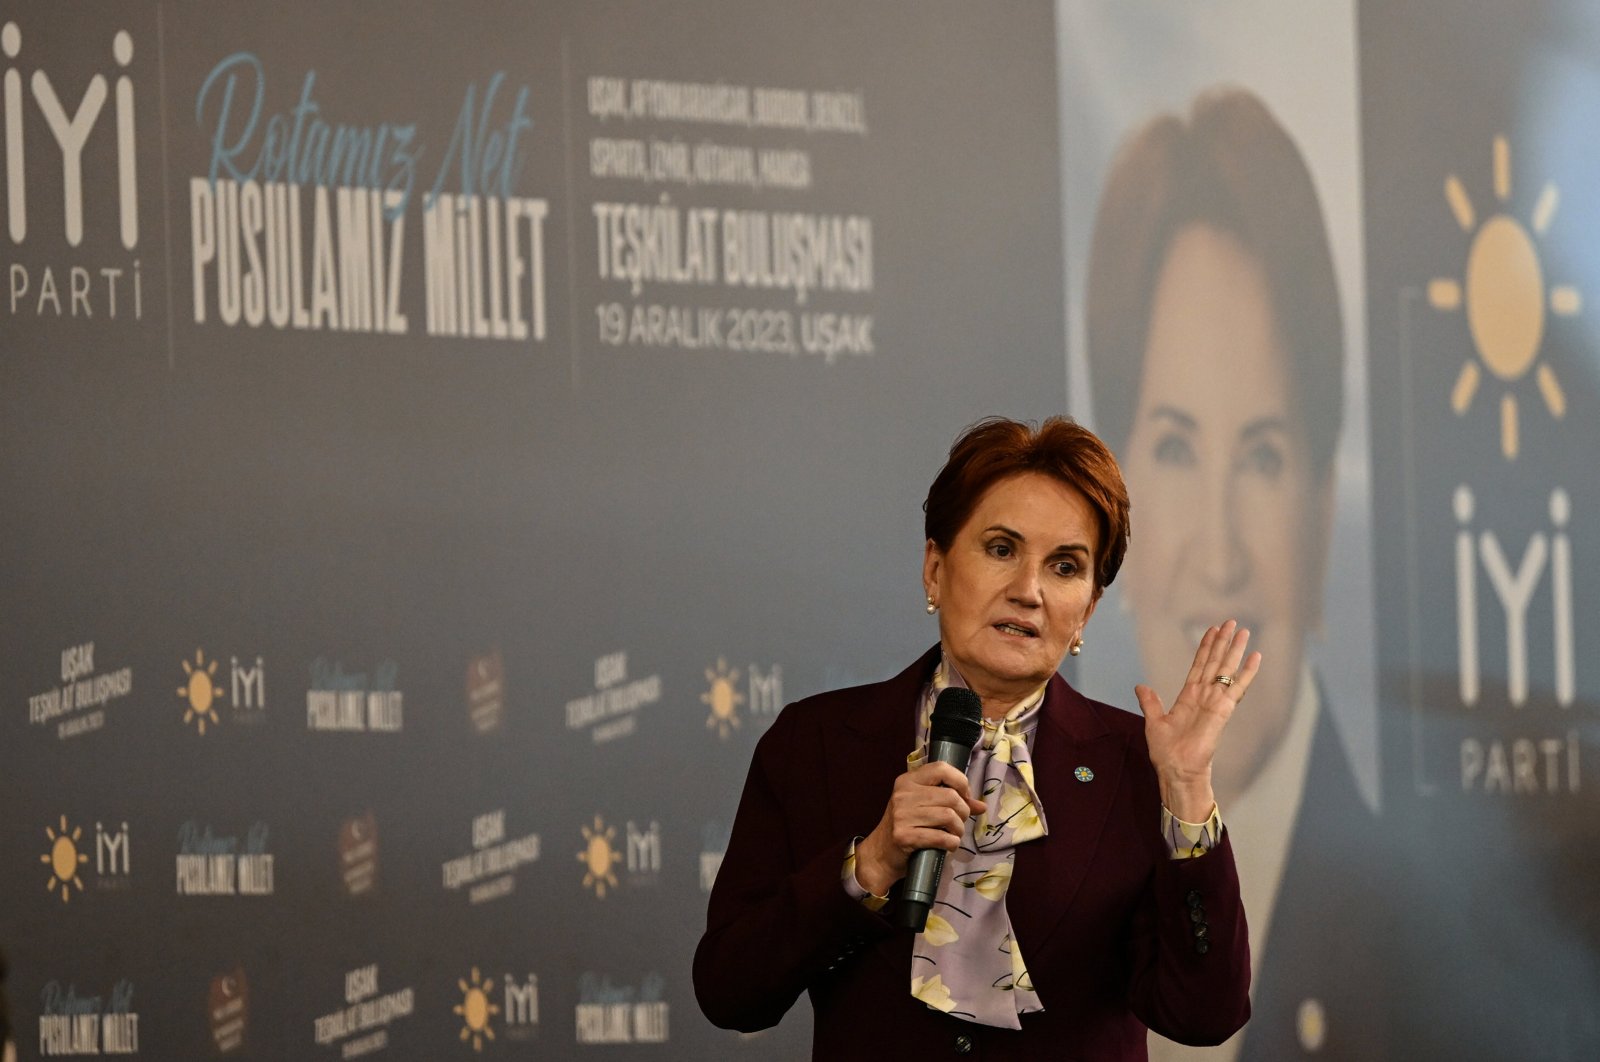 The Good Party (IP) Chair Meral Akşener speaks at a party event in the central Uşak province, Türkiye, Dec. 19, 2023. (AA Photo)